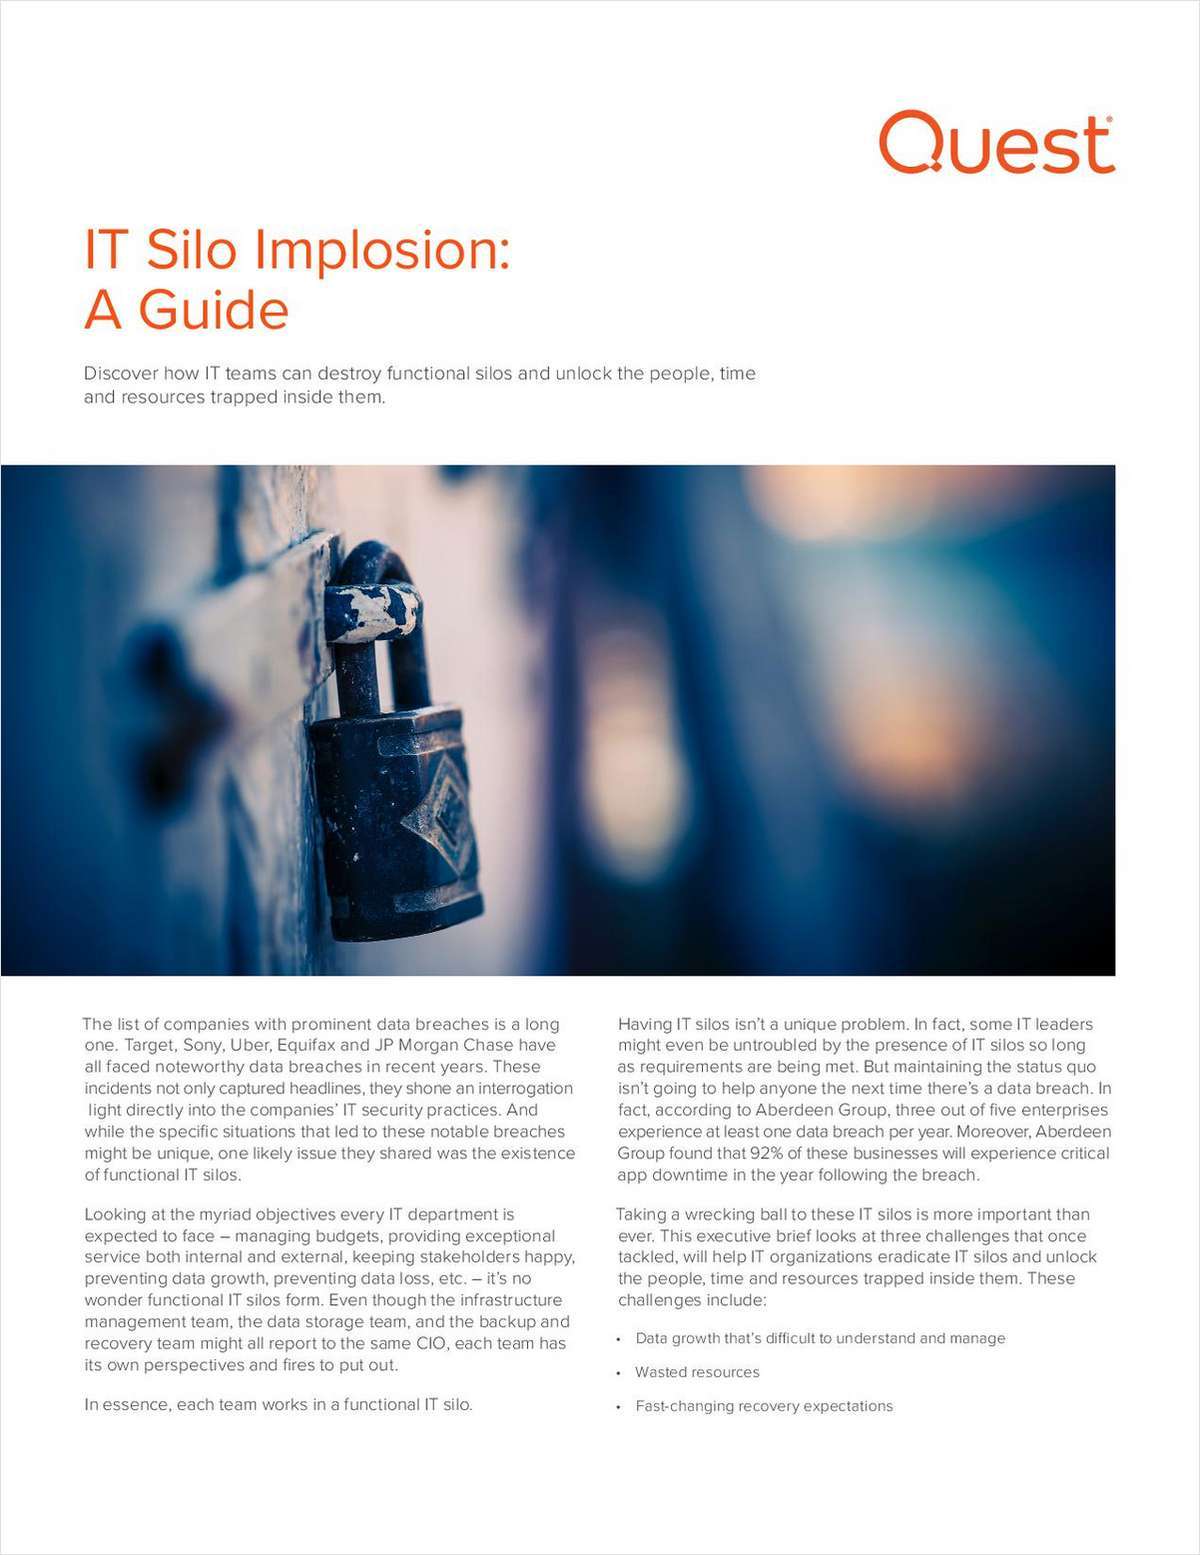 IT Silo Implosion: A Guide